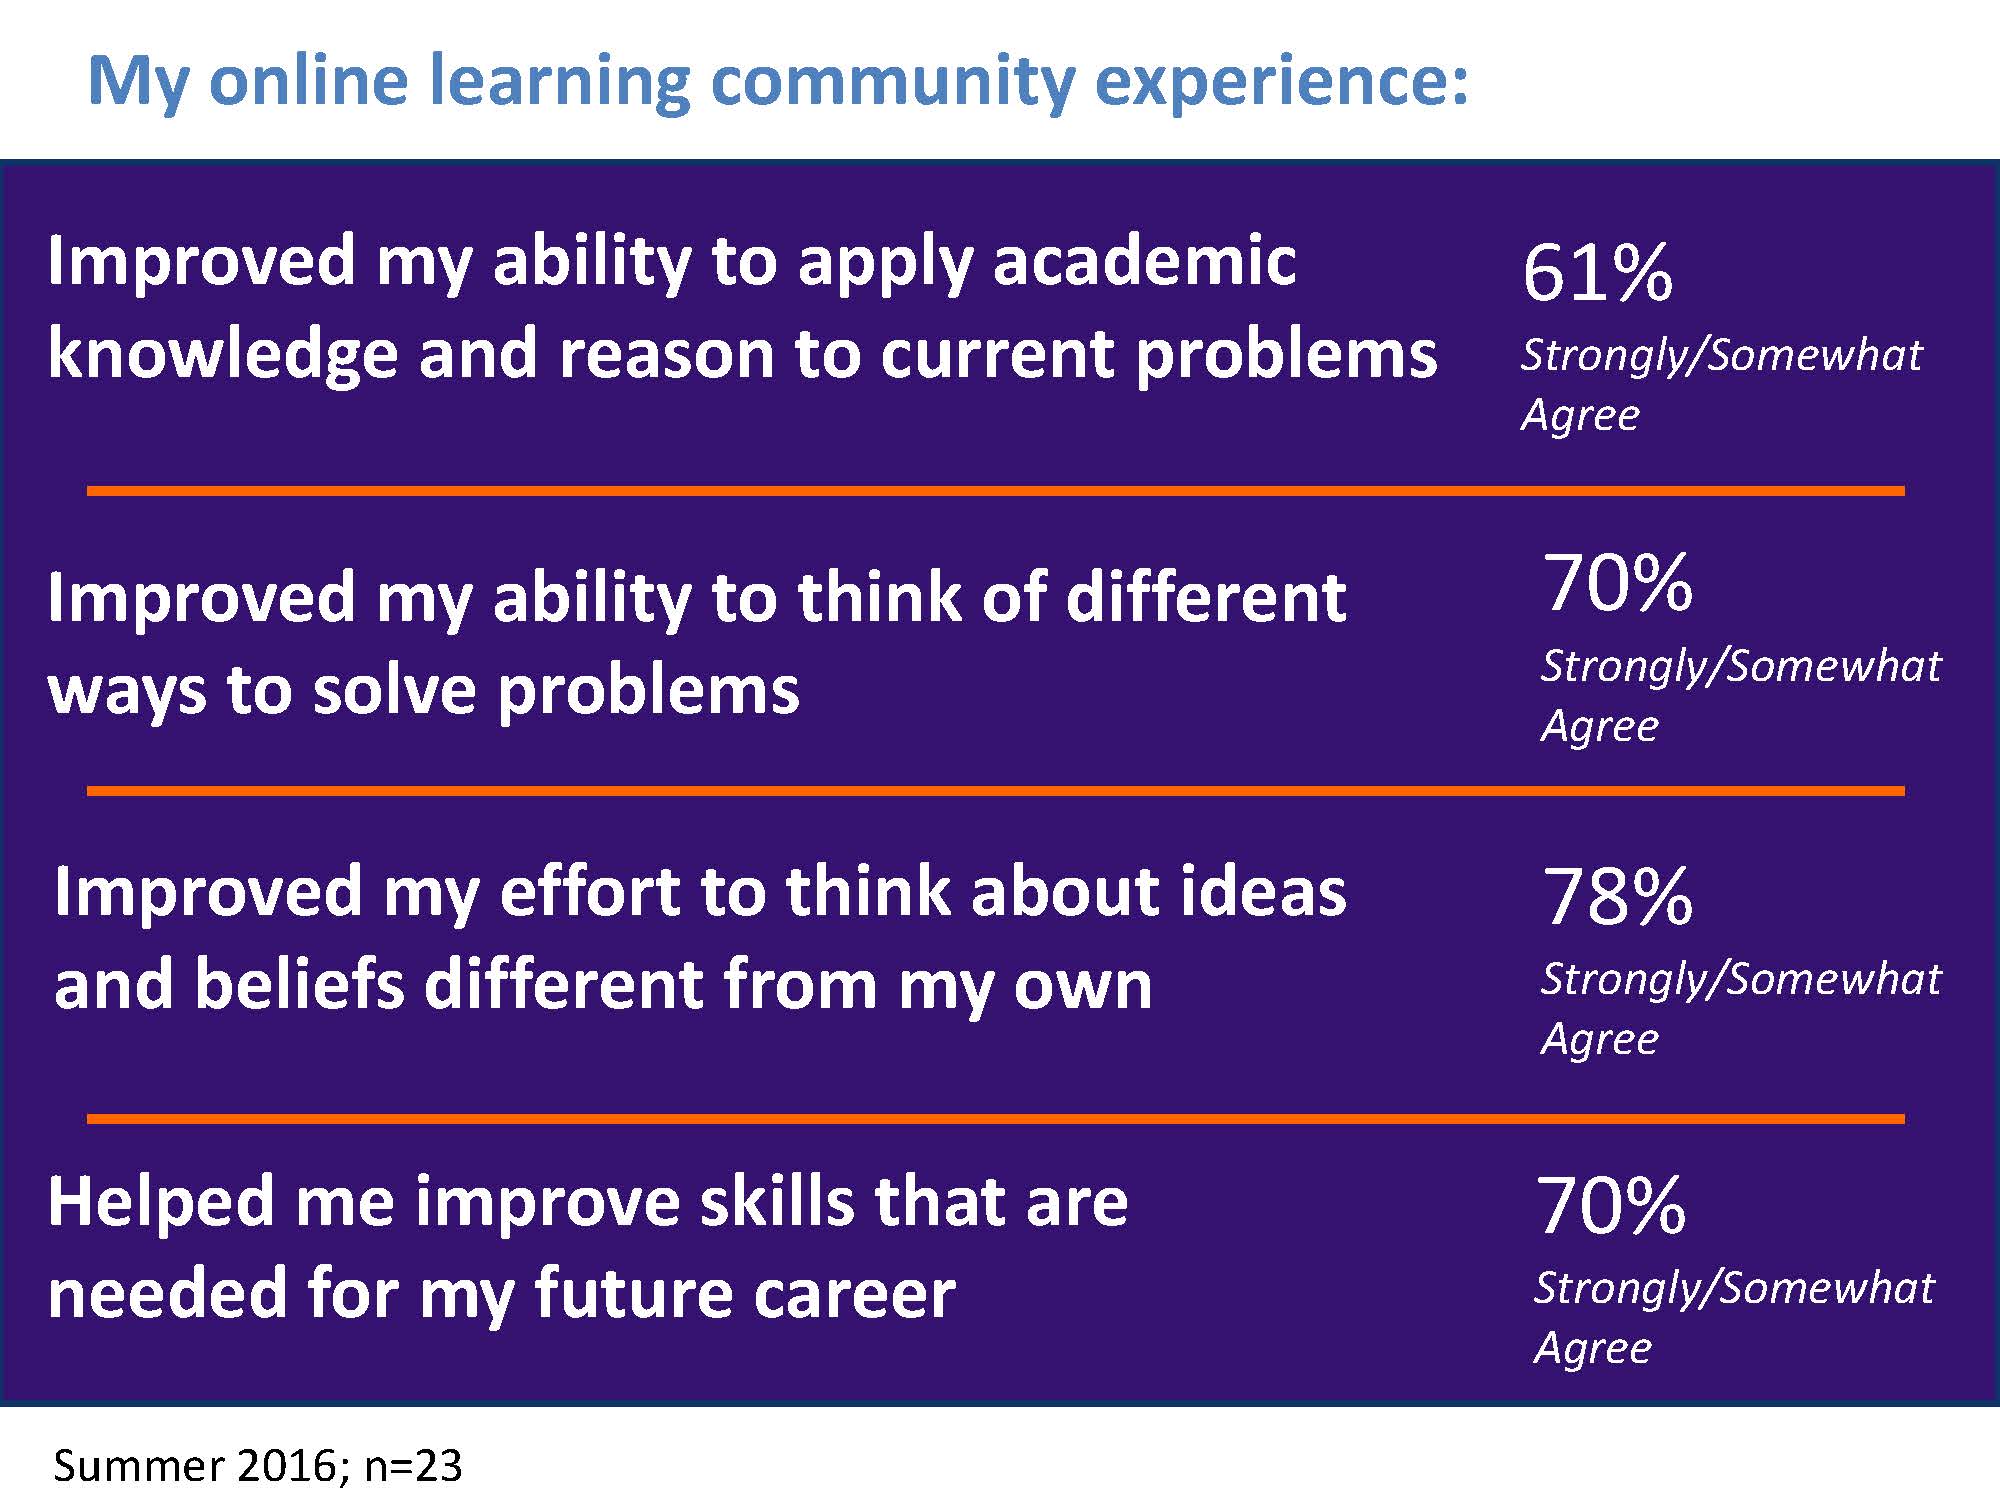 My online learning community experience